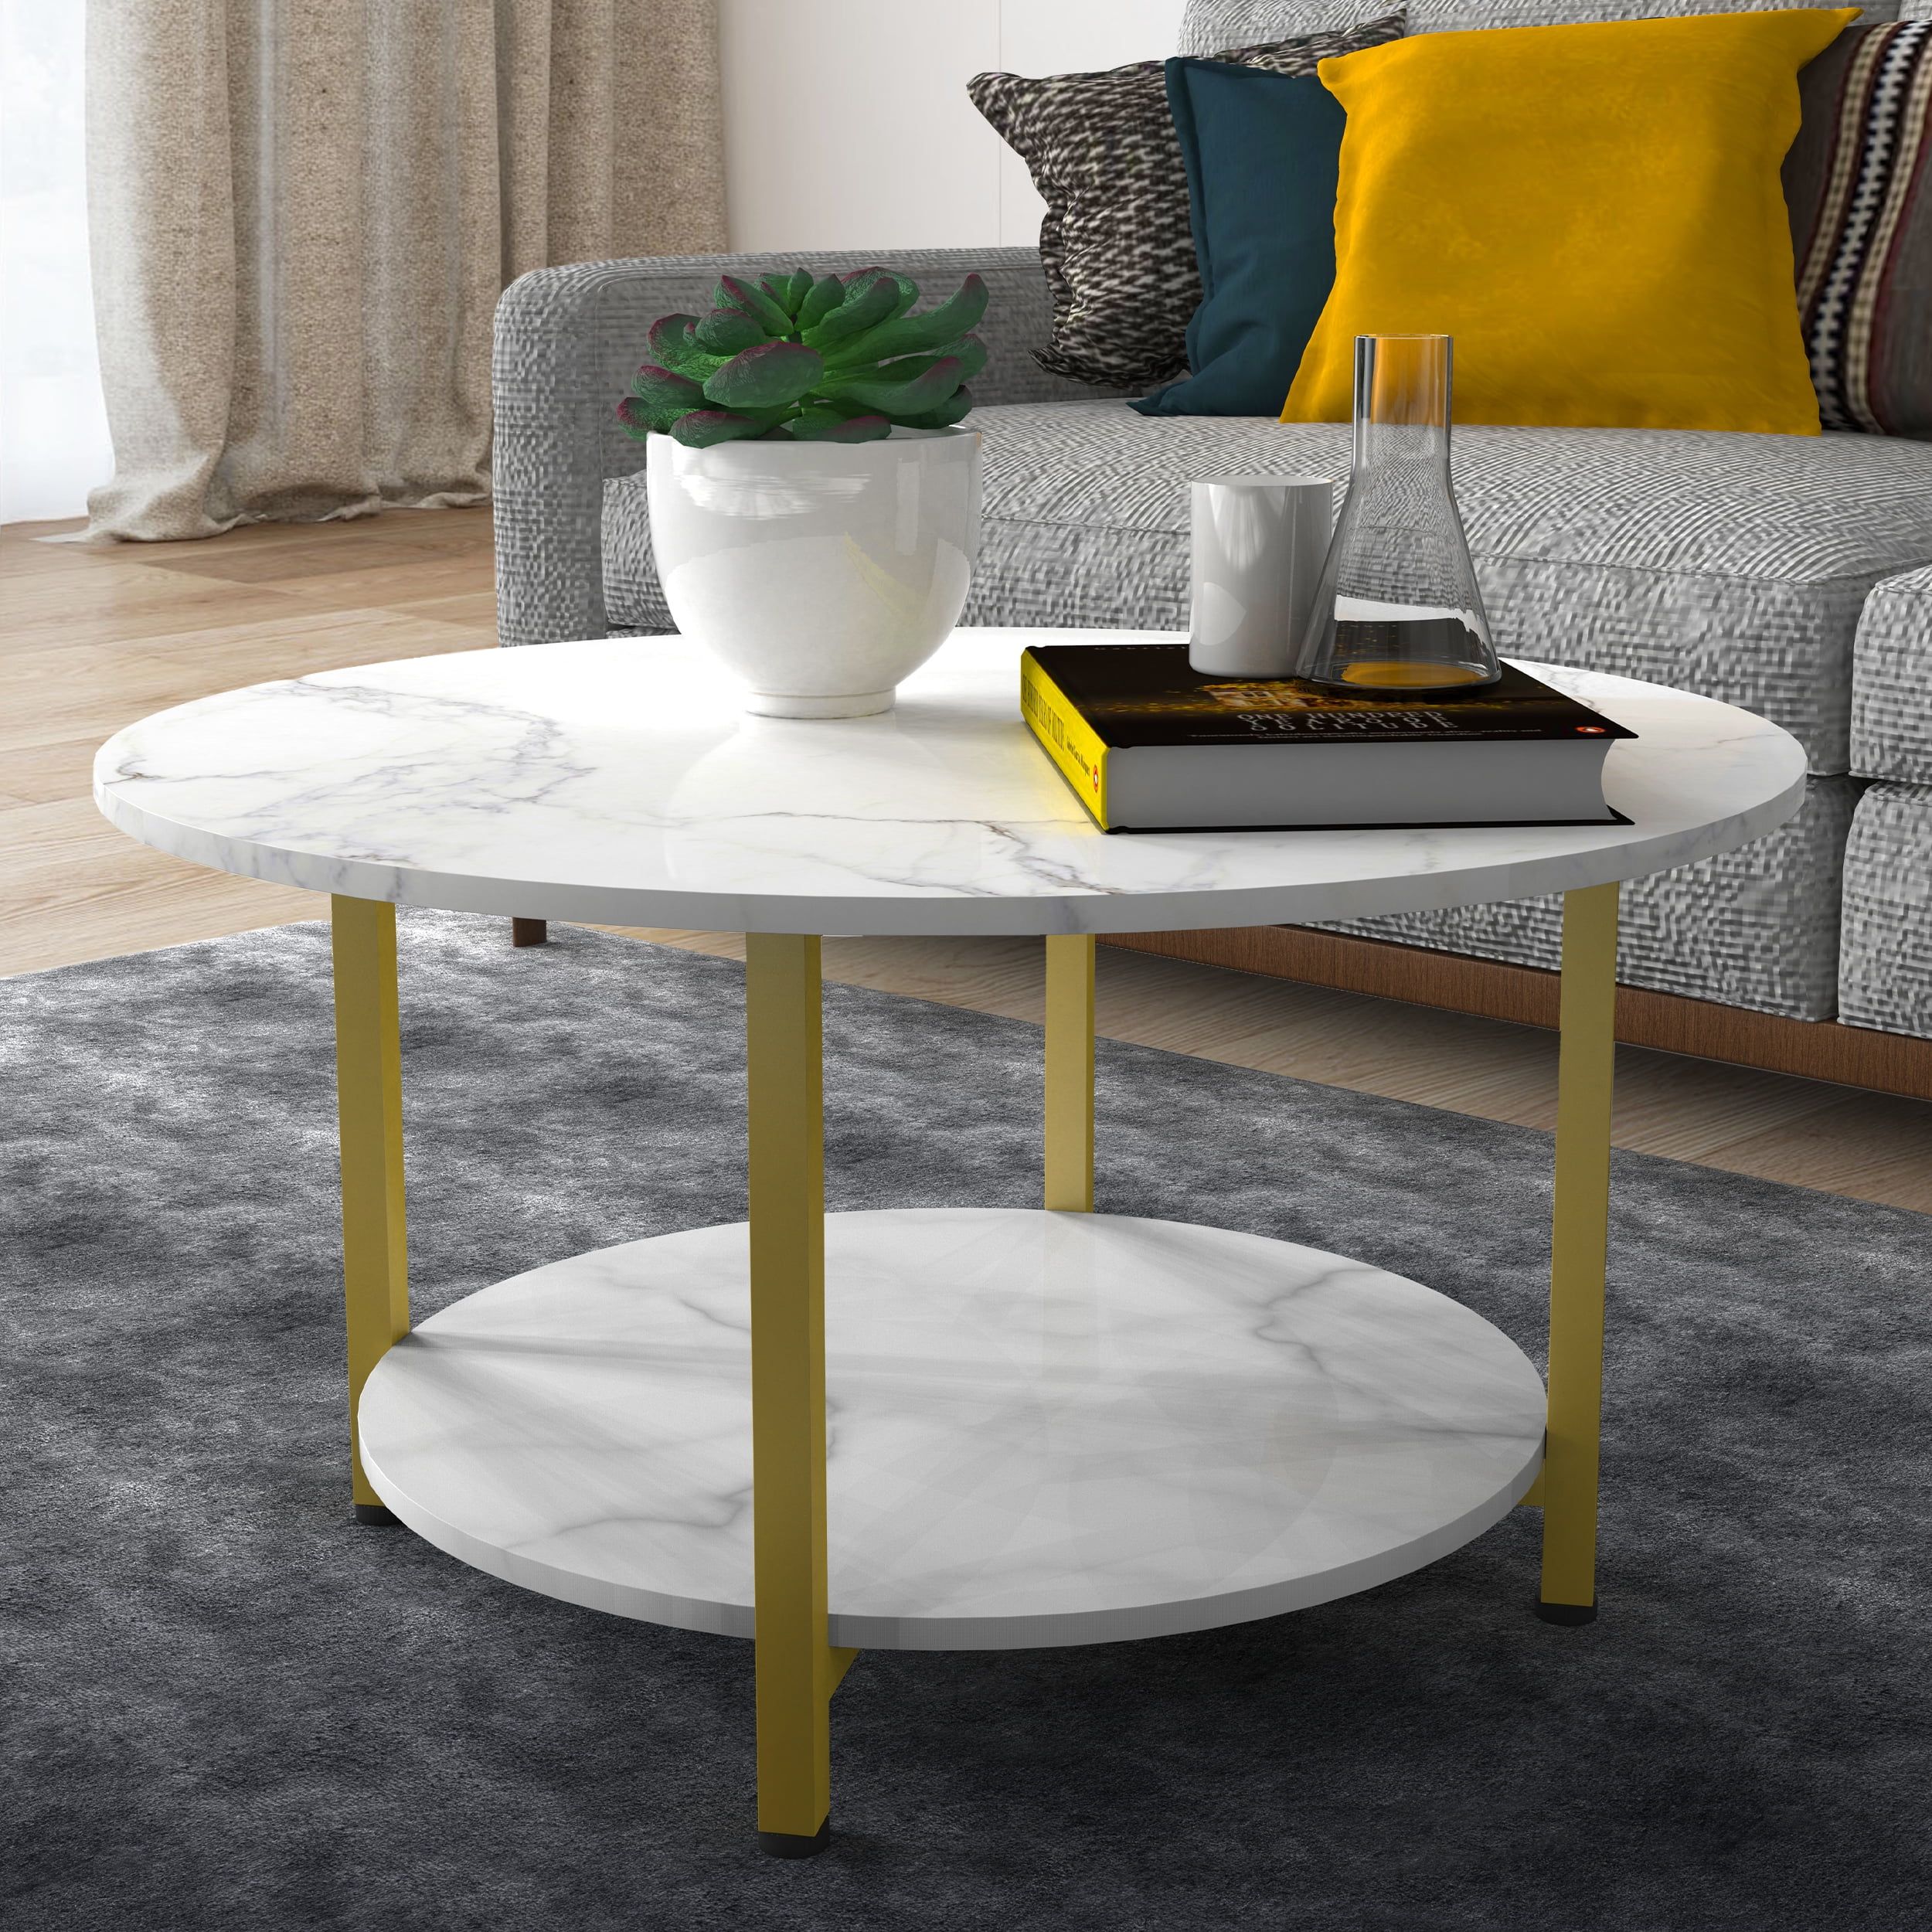 Benton Park Modern Faux Marble 2 Tier Round Coffee, White/Gold – Walmart Throughout Modern Round Faux Marble Coffee Tables (View 12 of 15)